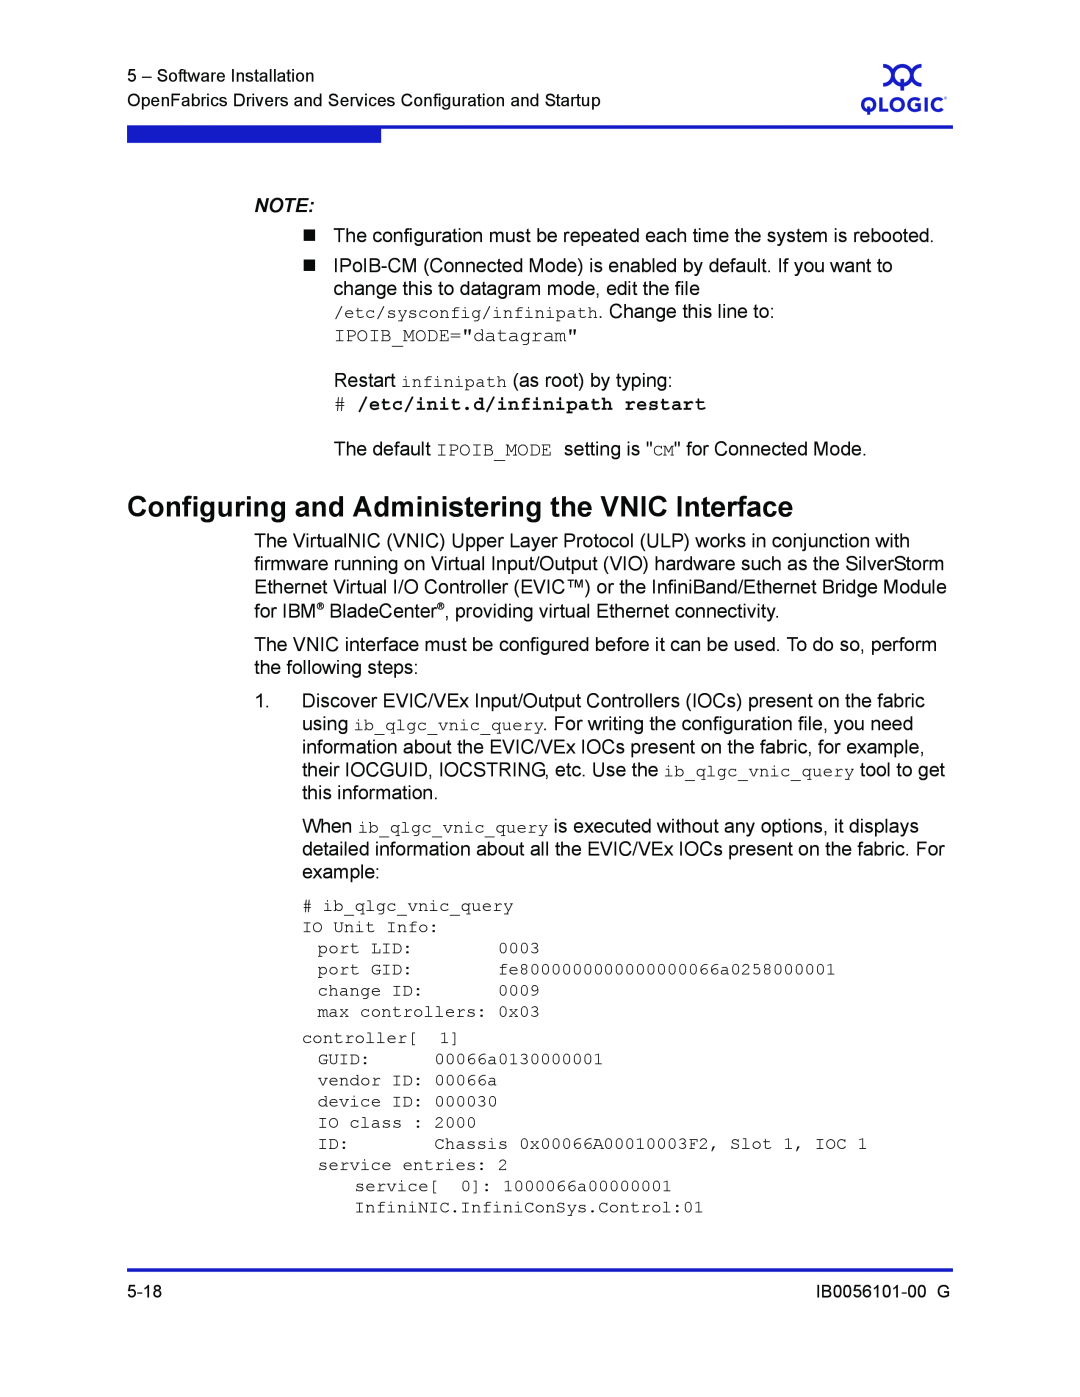 Q-Logic IB0056101-00 G manual Configuring and Administering the VNIC Interface, # /etc/init.d/infinipath restart 